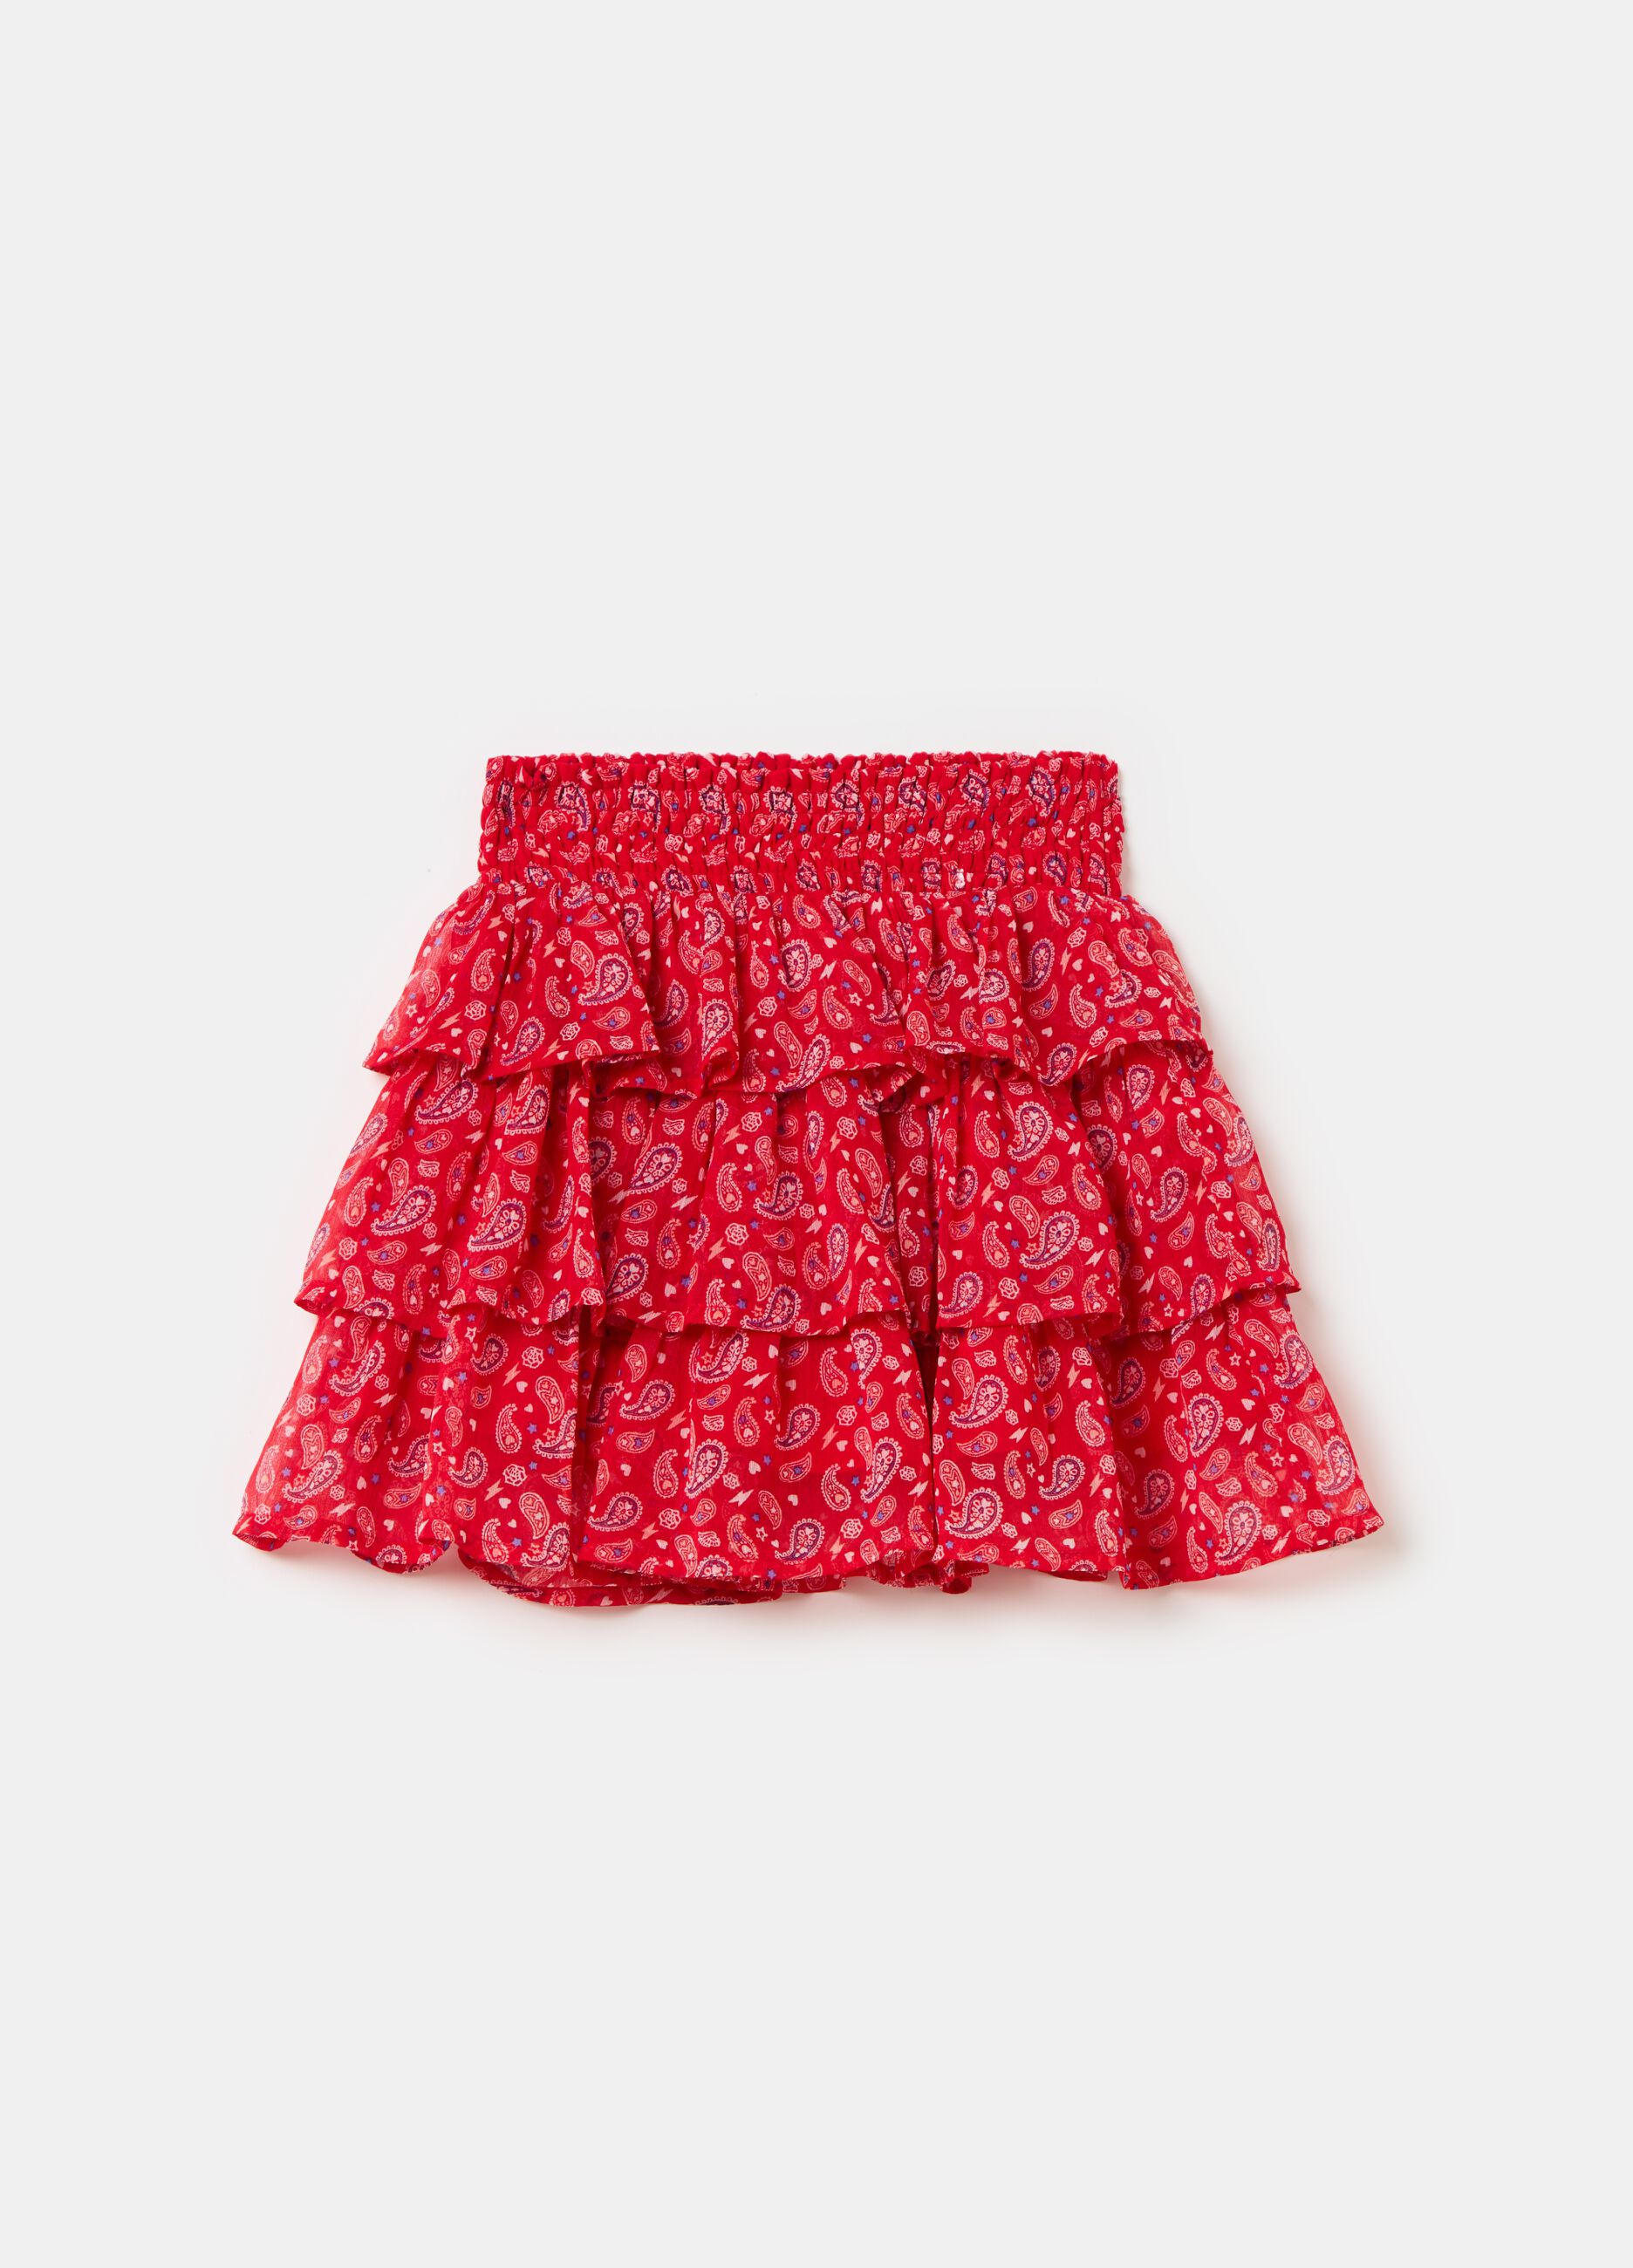 Tiered skirt with paisley pattern